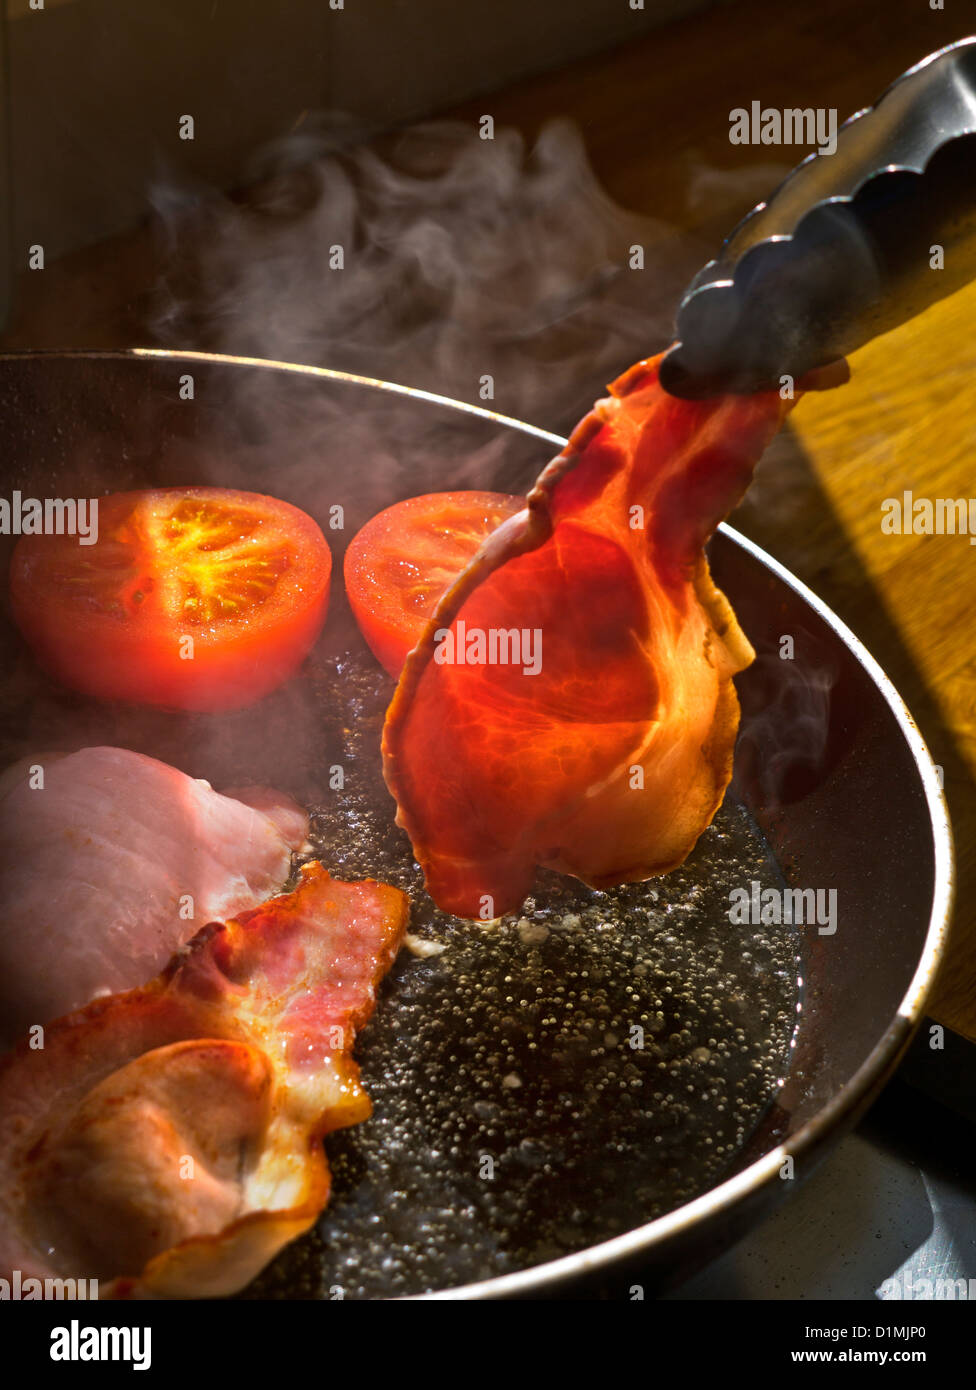 BACON RASHER FRYING PAN Shaft of sunlight illuminates a rasher of organic back bacon being turned in a hot frying pan containing tomatoes Stock Photo